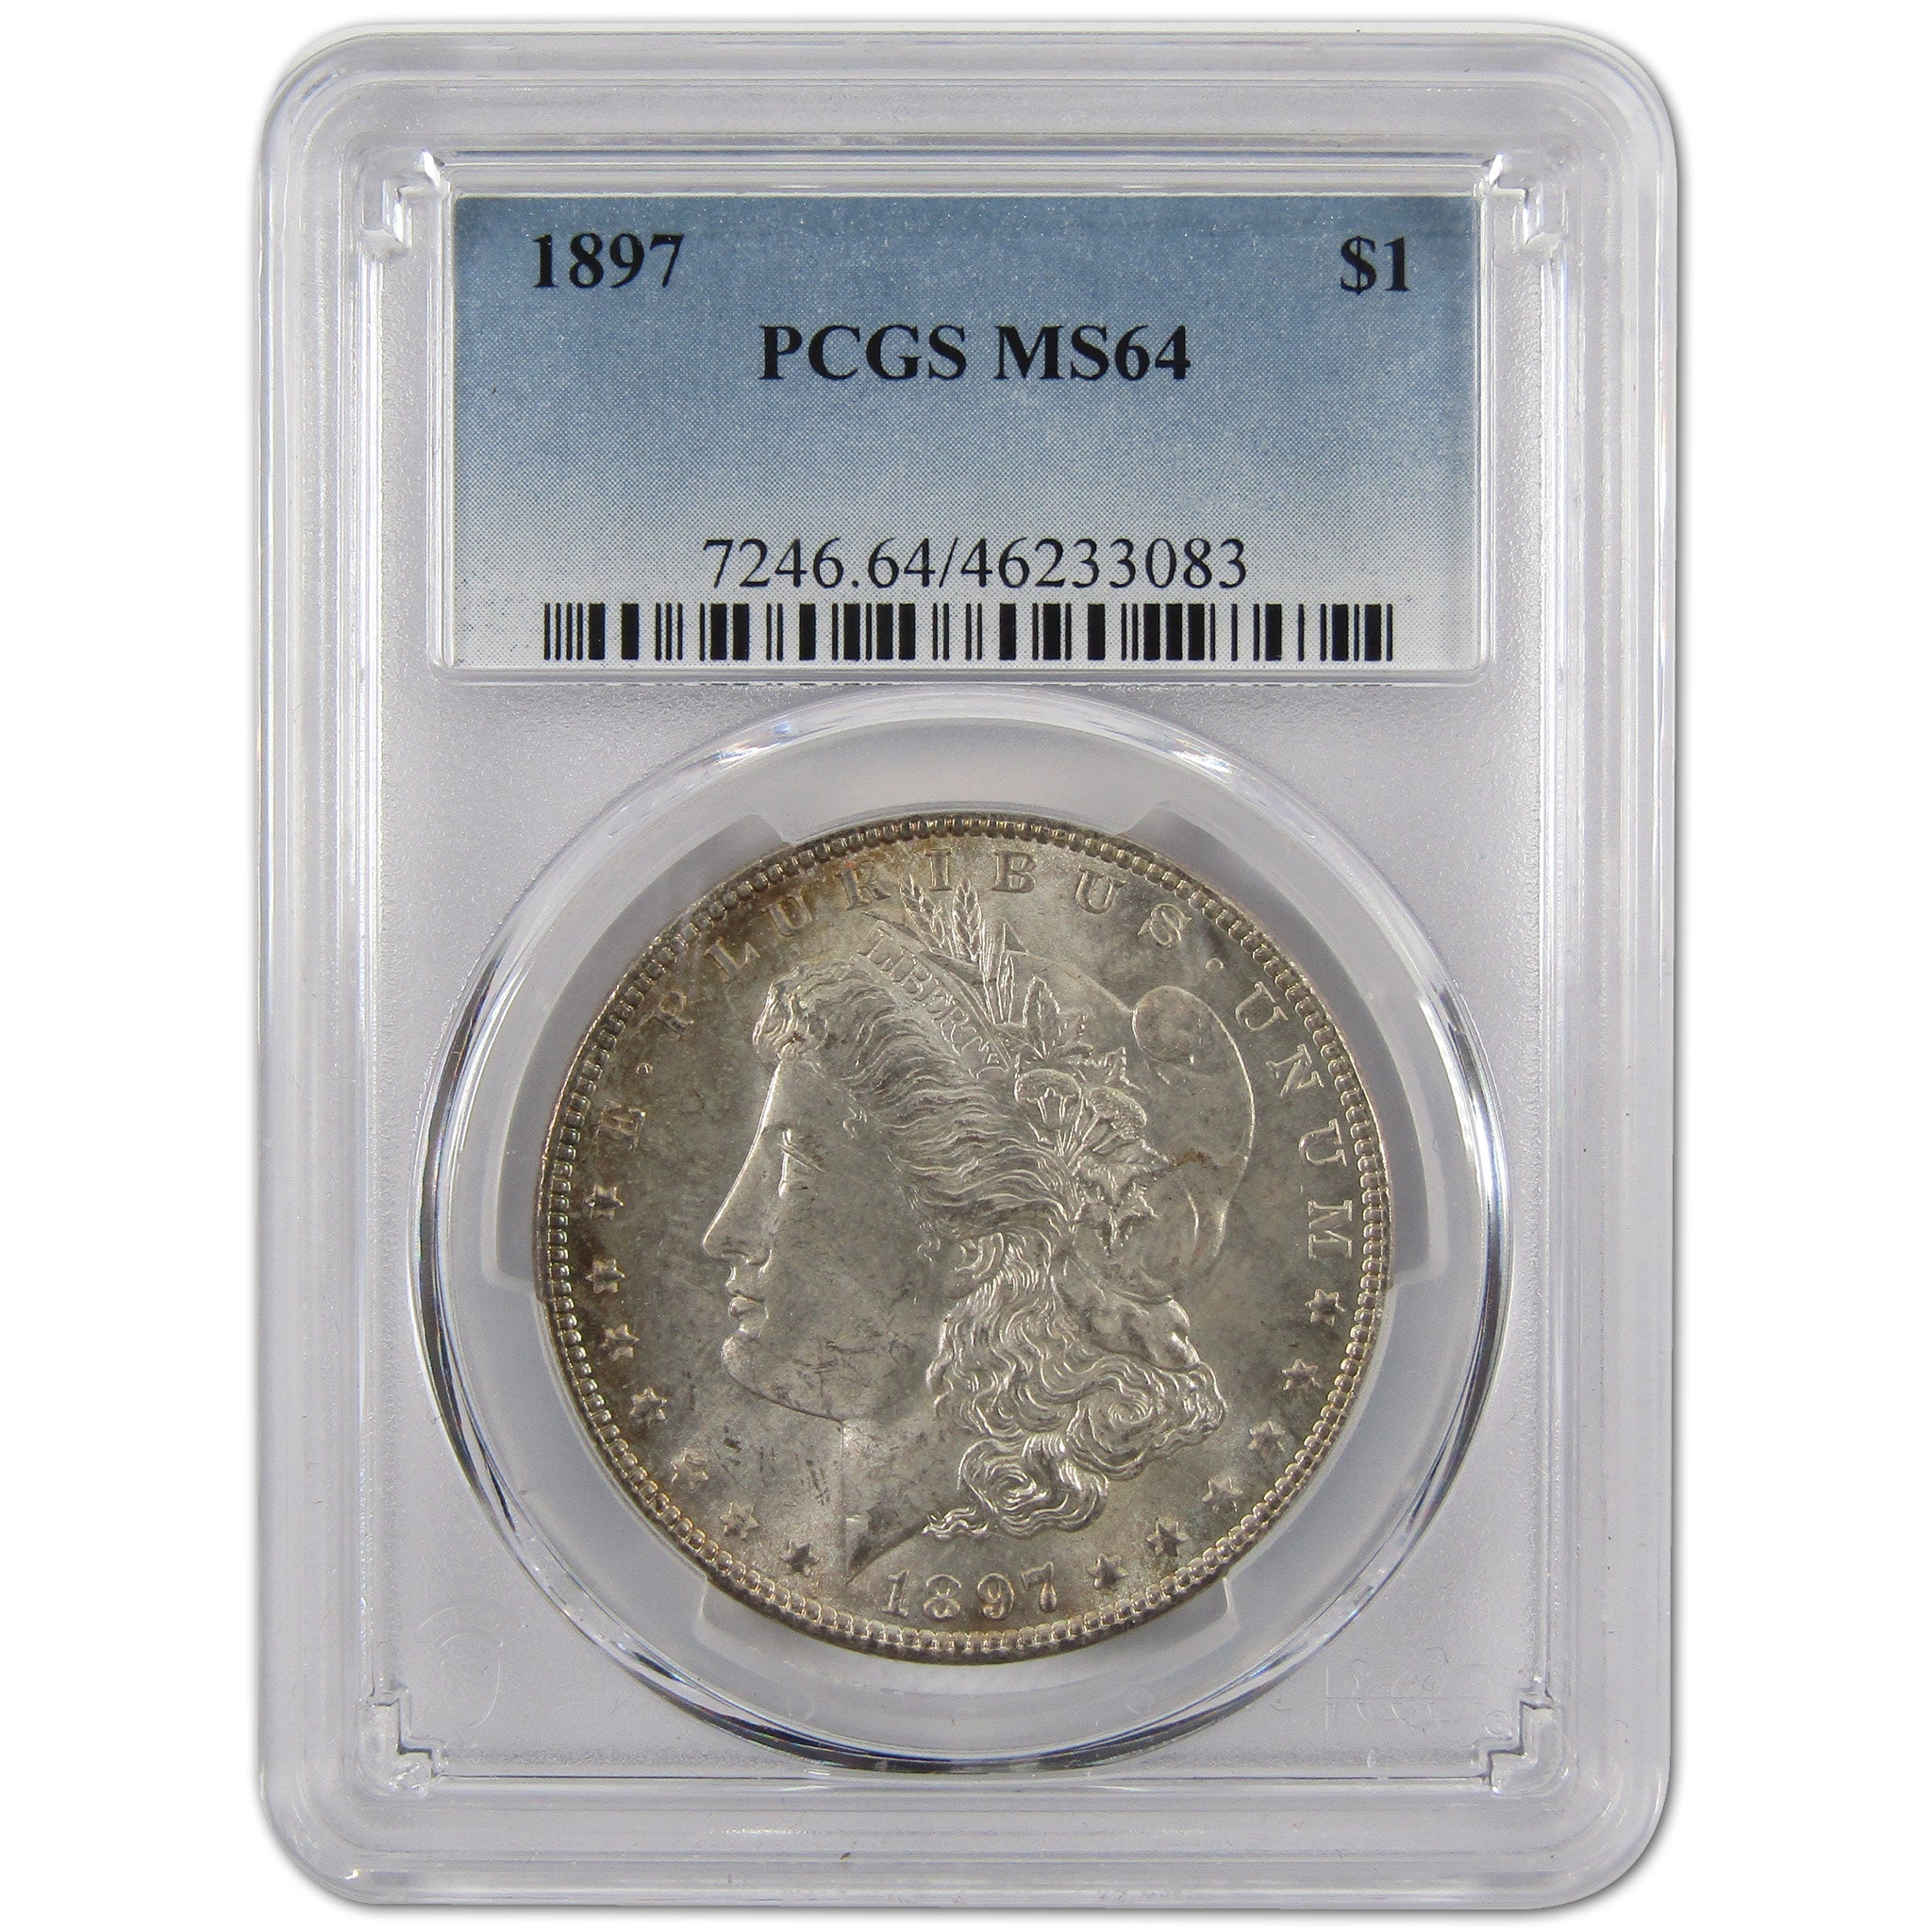 1897 Morgan Dollar MS 64 PCGS Silver $1 Uncirculated Coin SKU:I10892 - Morgan coin - Morgan silver dollar - Morgan silver dollar for sale - Profile Coins &amp; Collectibles